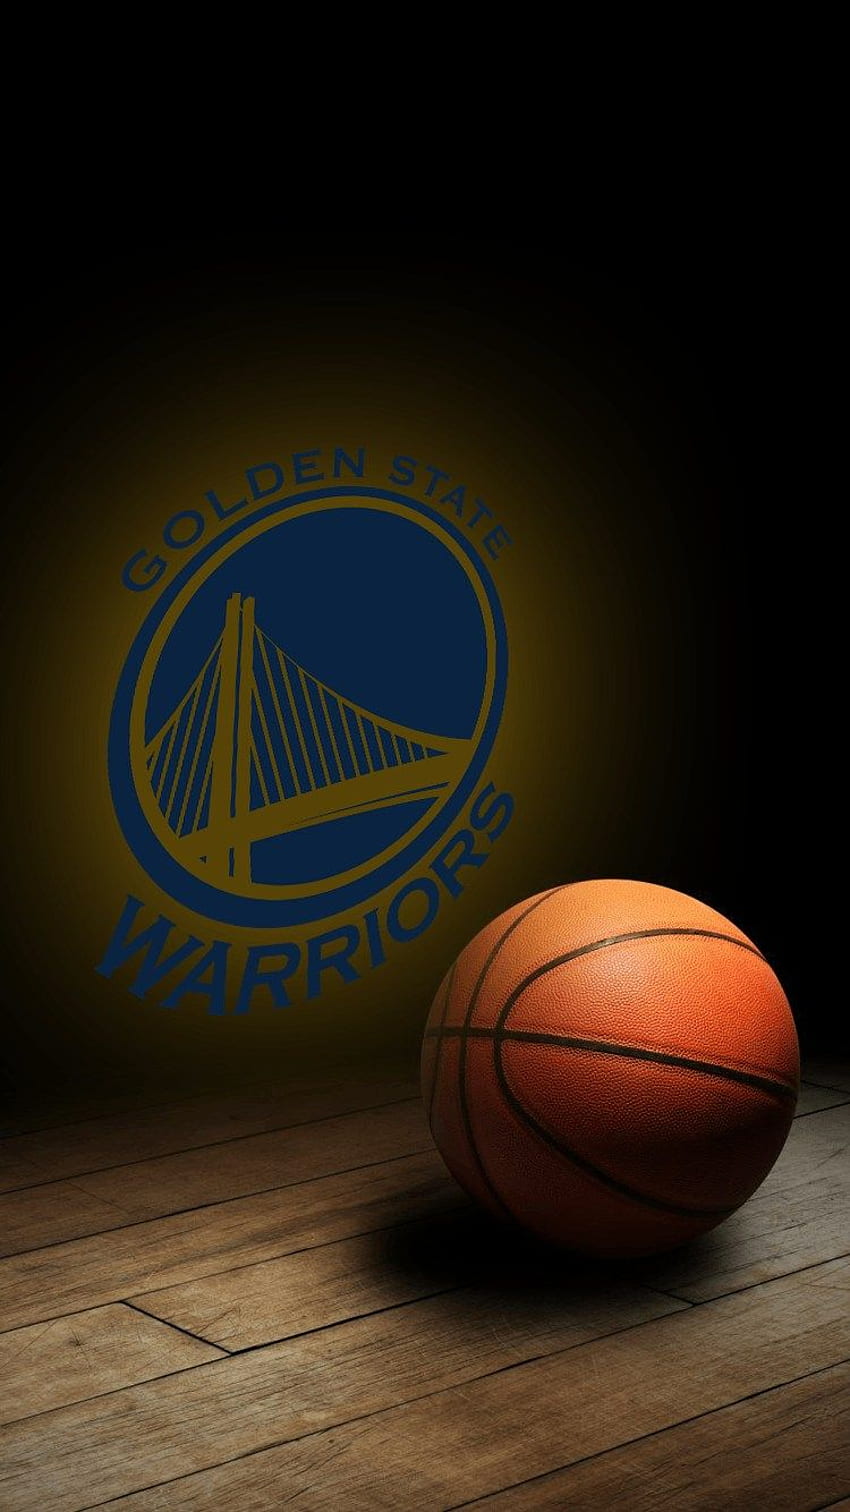 Golden State iPhone Wallpapers  Wallpaper Cave